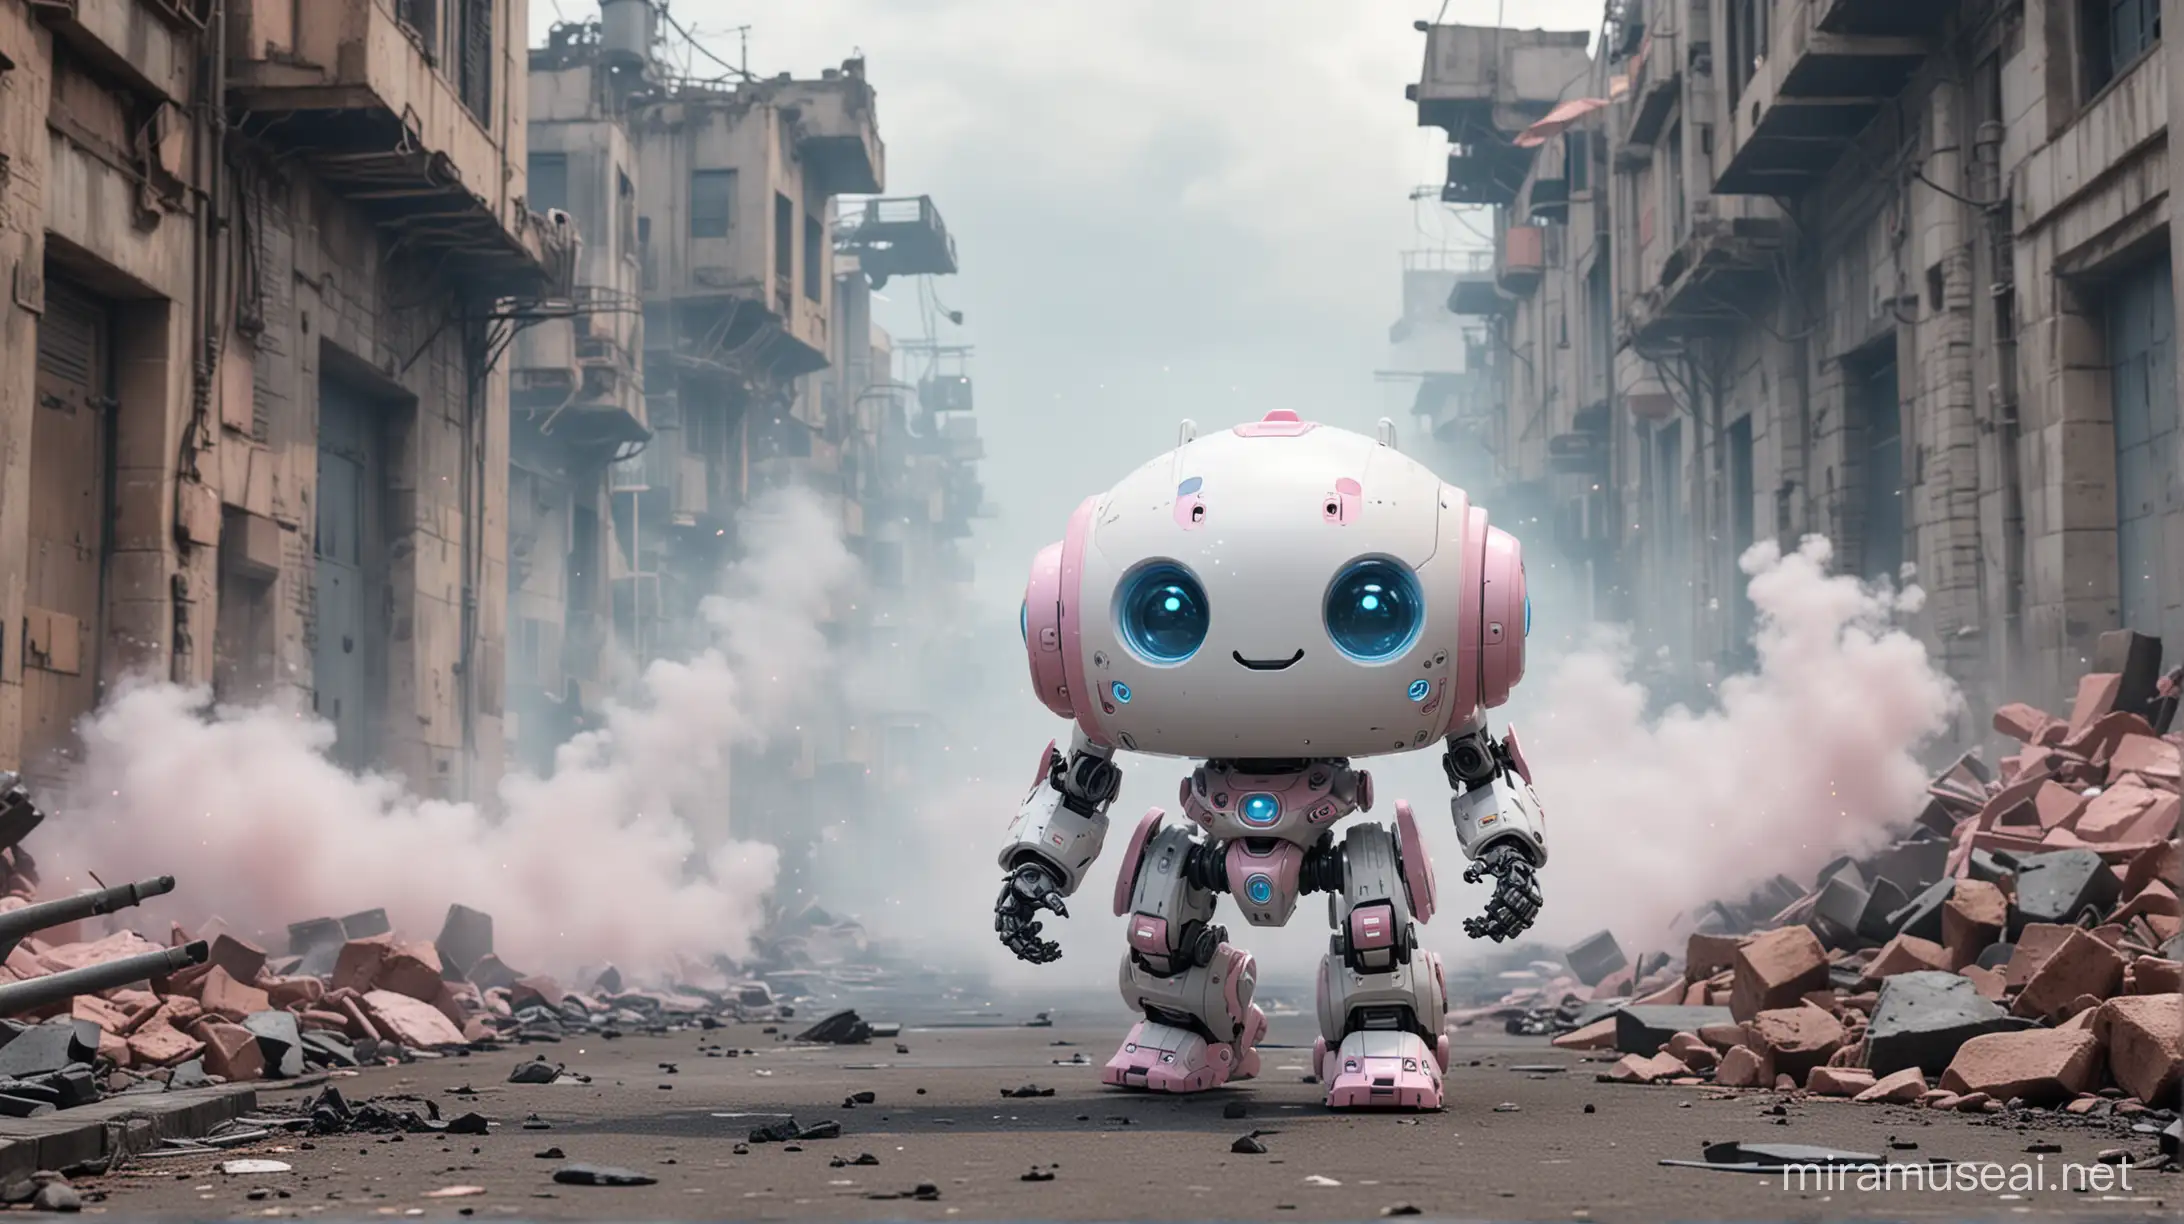 One small kawaii walking white and baby pink robot Head with baby blue eyes, smile. Manga Anime Mecha style female robot body with two Anime Mecha legs arms and feets and chibi hands. Behind in the background on ground smoke, fires and city ruins behind fog. At a distance small explosions in the background. flying Debrees infront. Lights coming from behind, intense light from top. bright daylight. Sun. Topdown side view. Photo Realism, High-res.